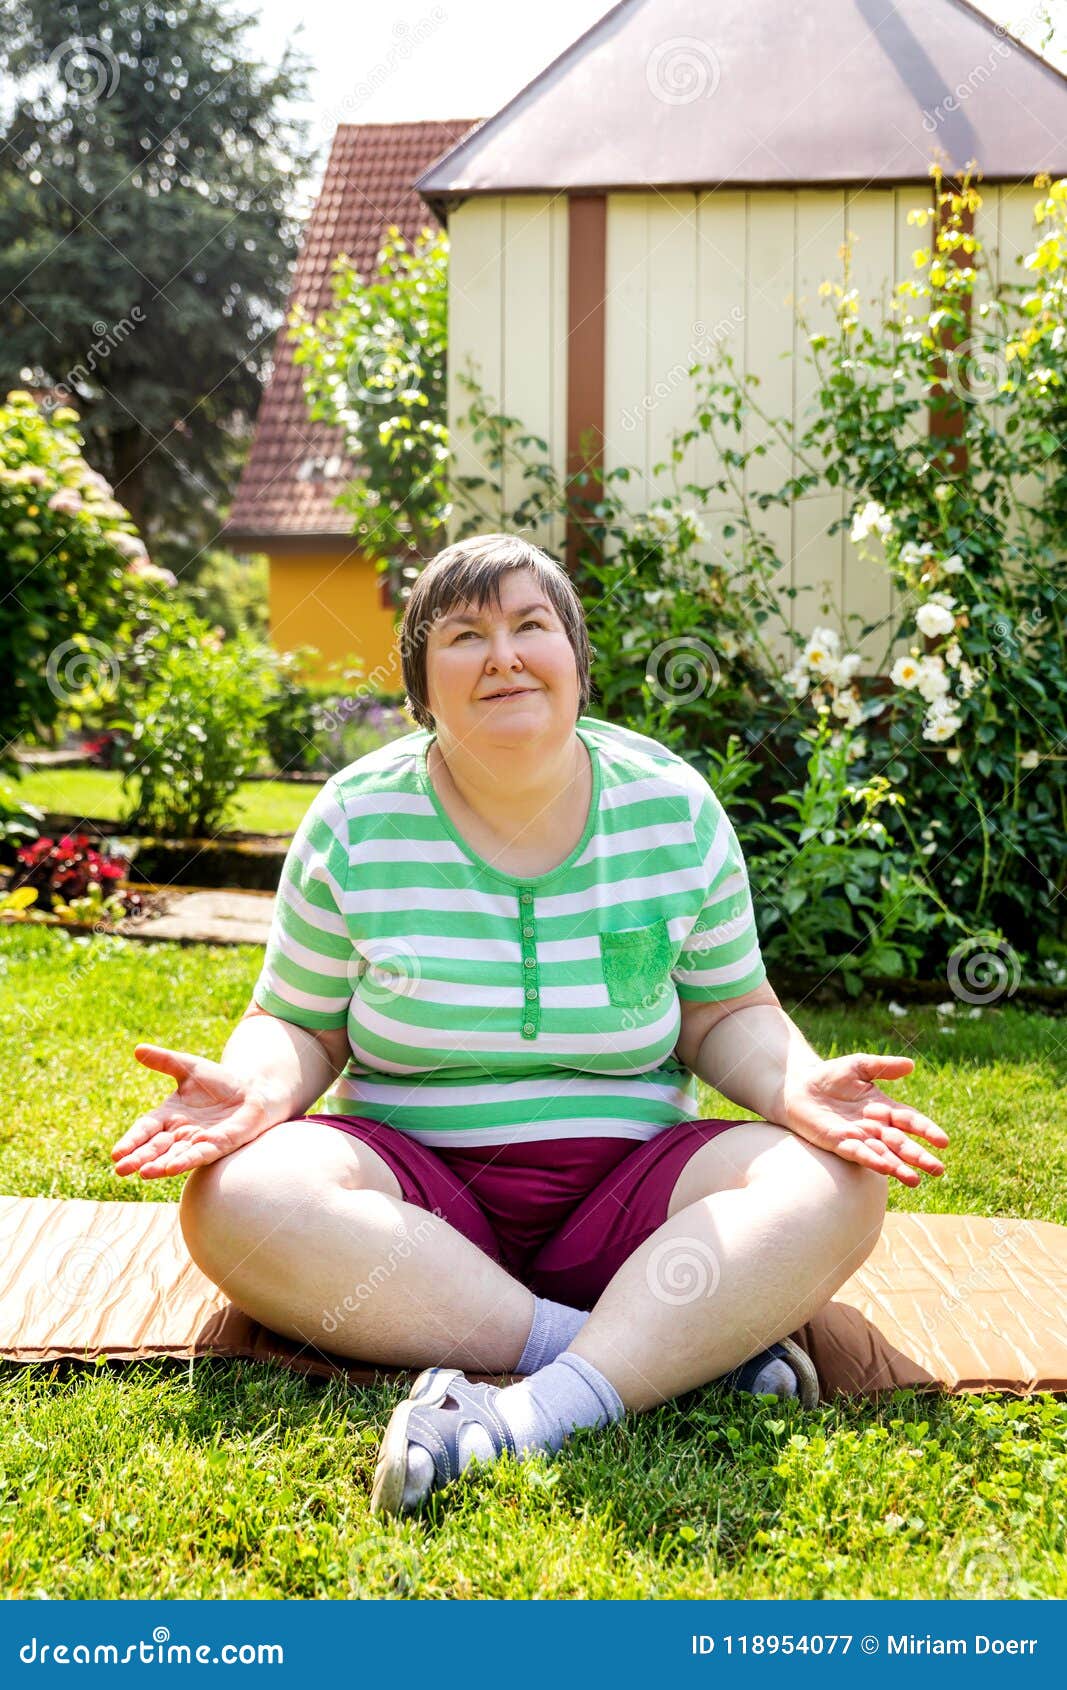 single mentally disabled woman is doing some relaxation yoga exercises